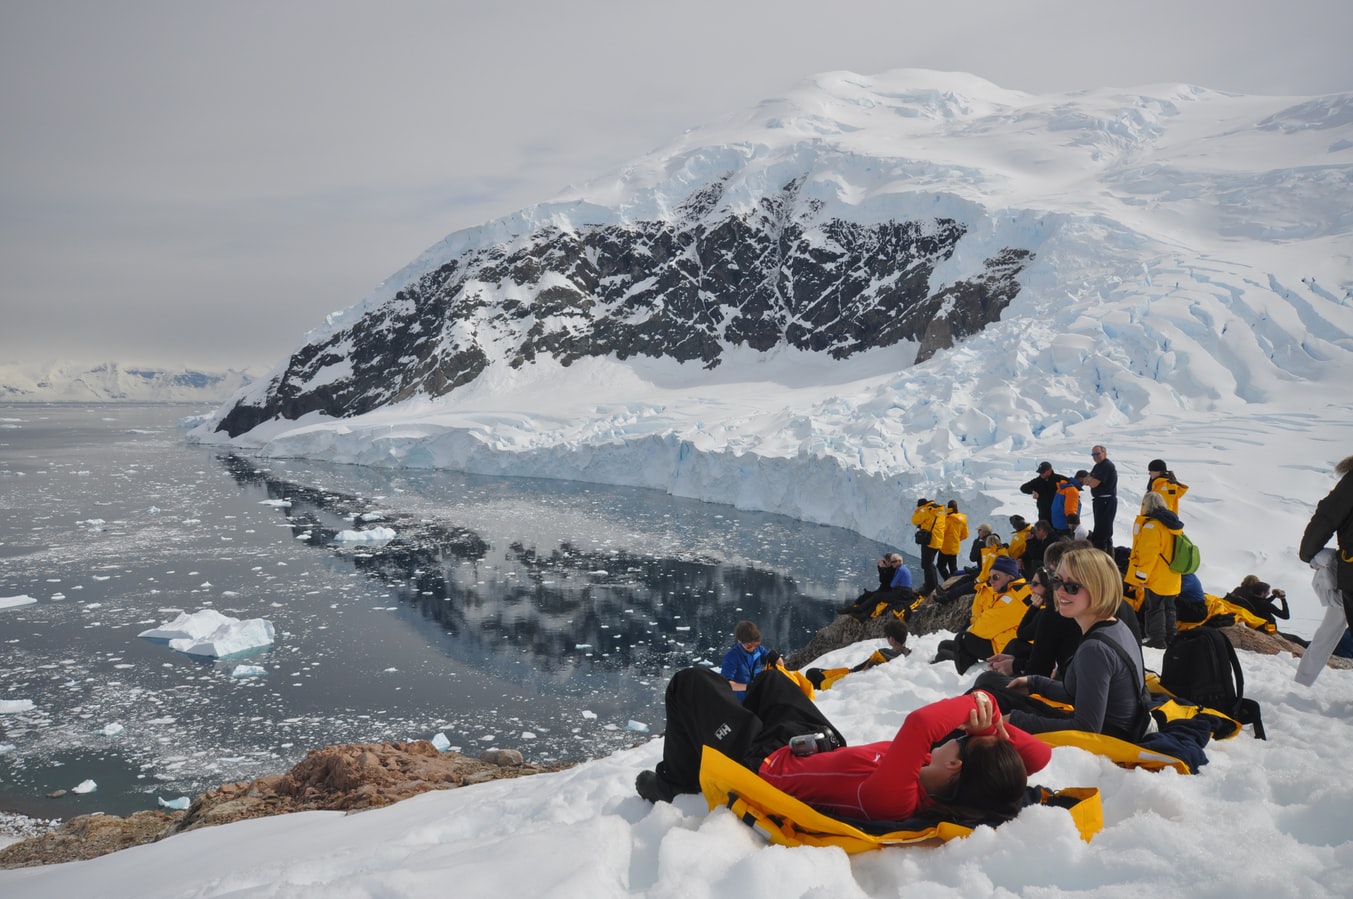 East Antarctica – One Of The Most Pristine Destination To Visit